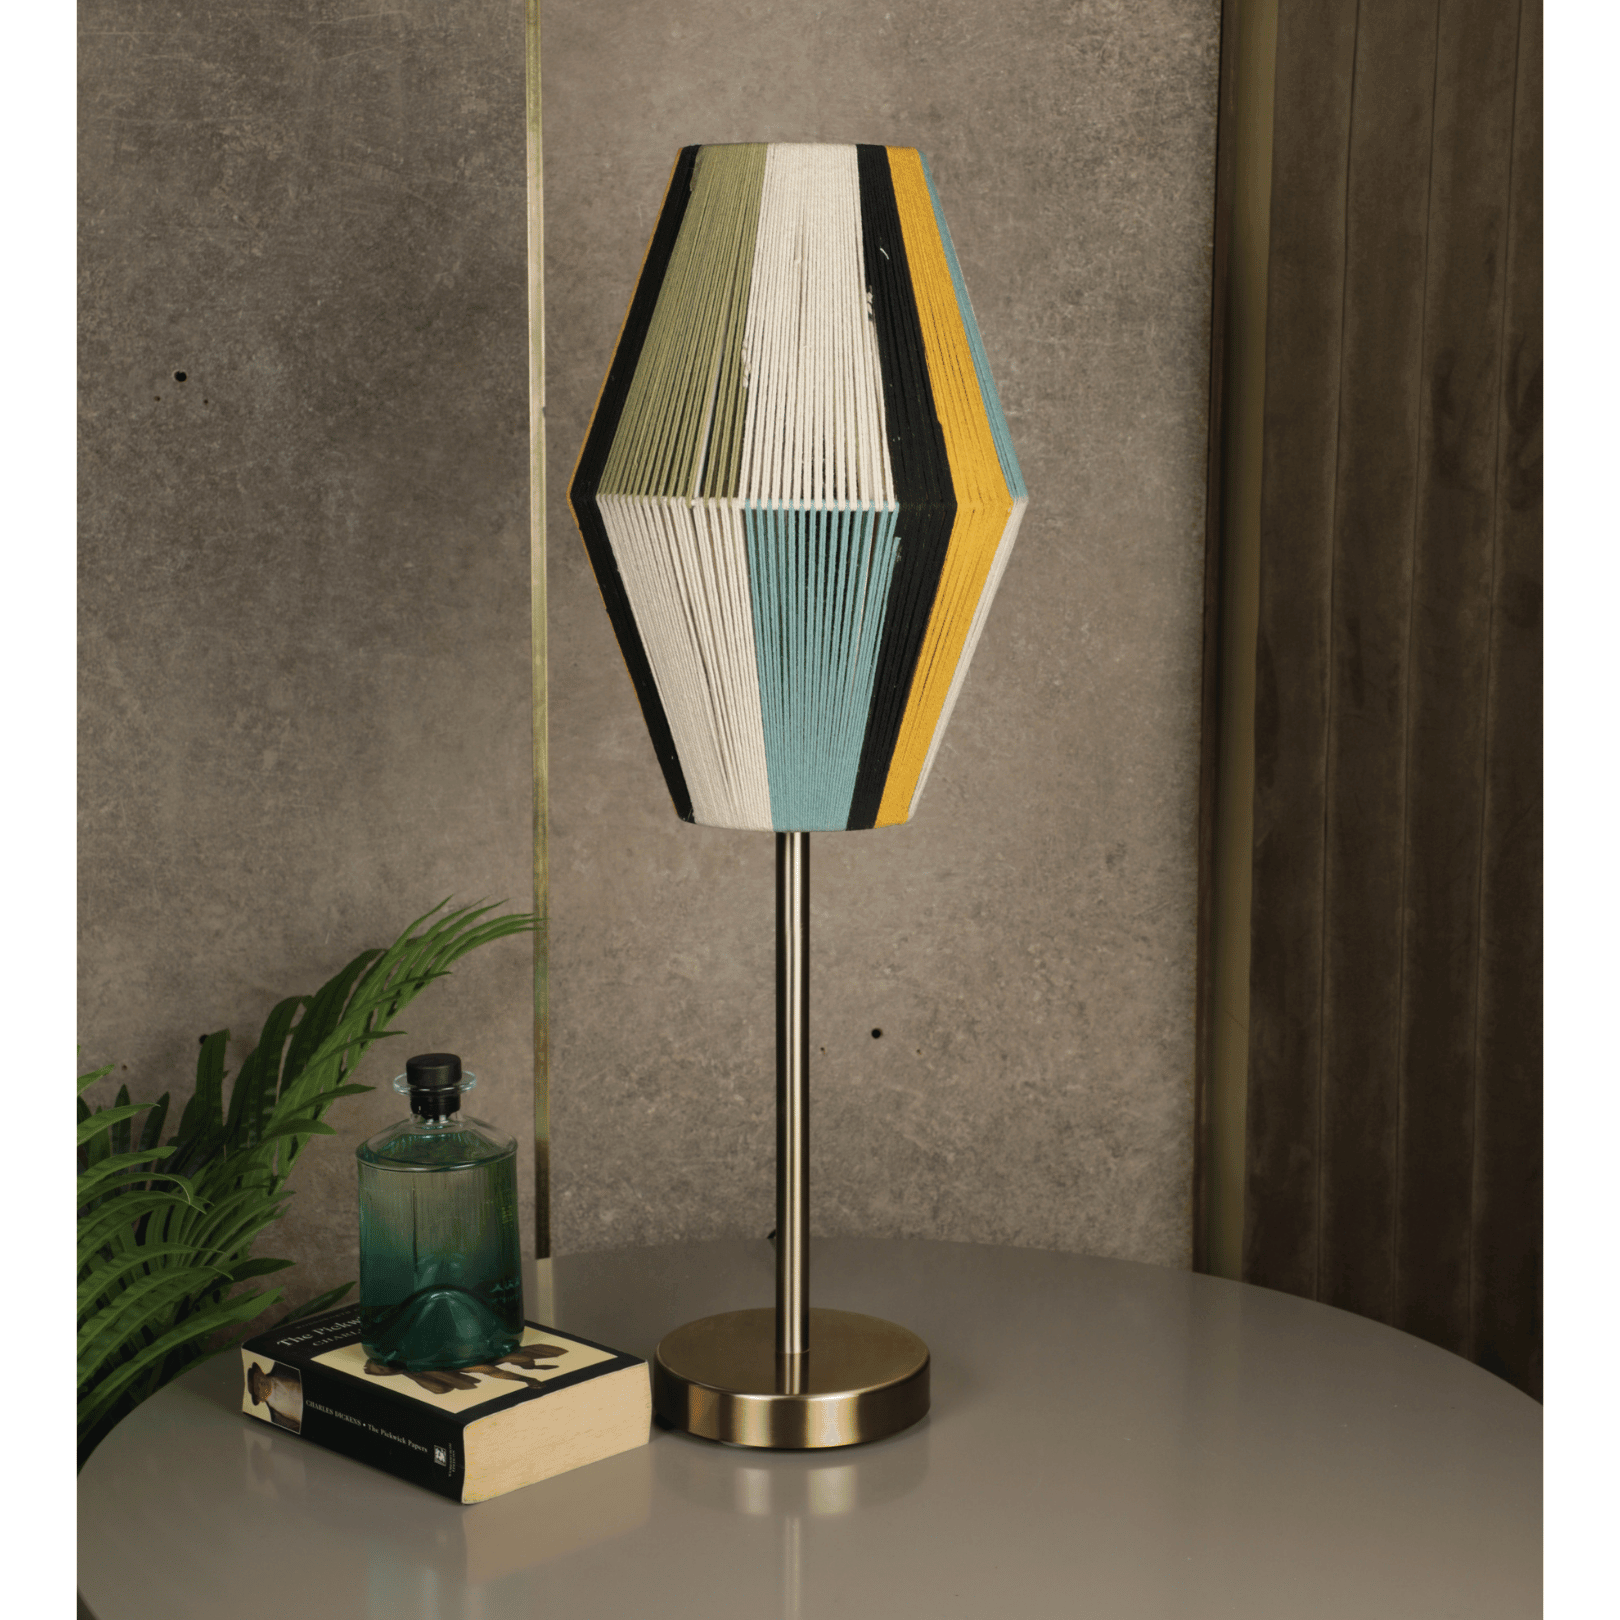 Nubila Handcrafted Table Lamp by The Light Library